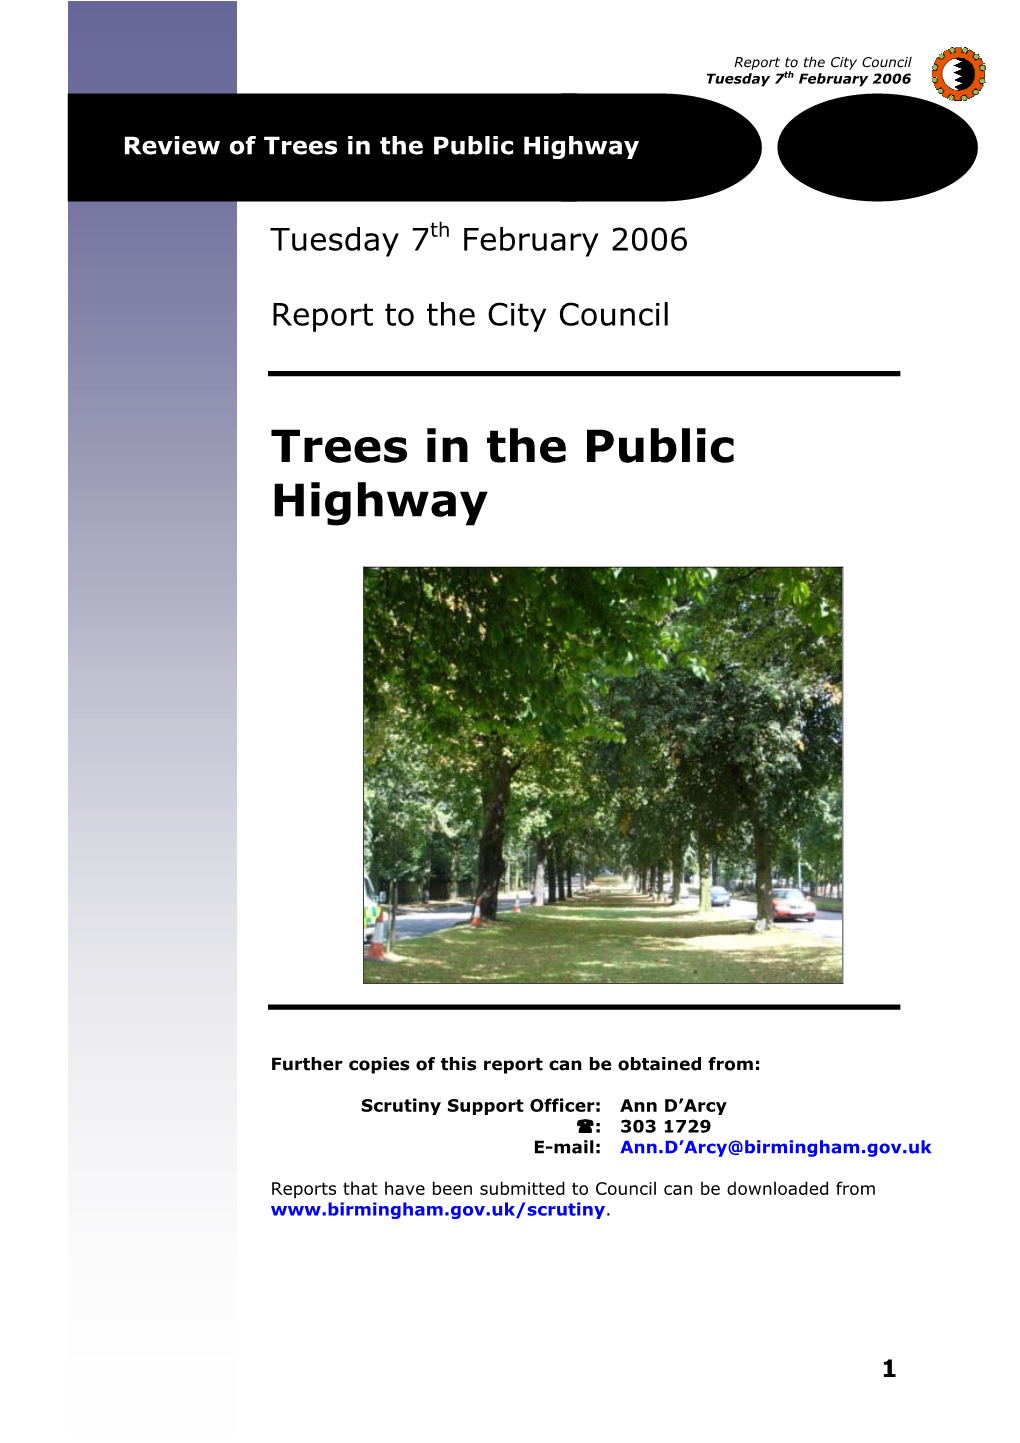 Download: Trees in the Public Highway Scrutiny Review